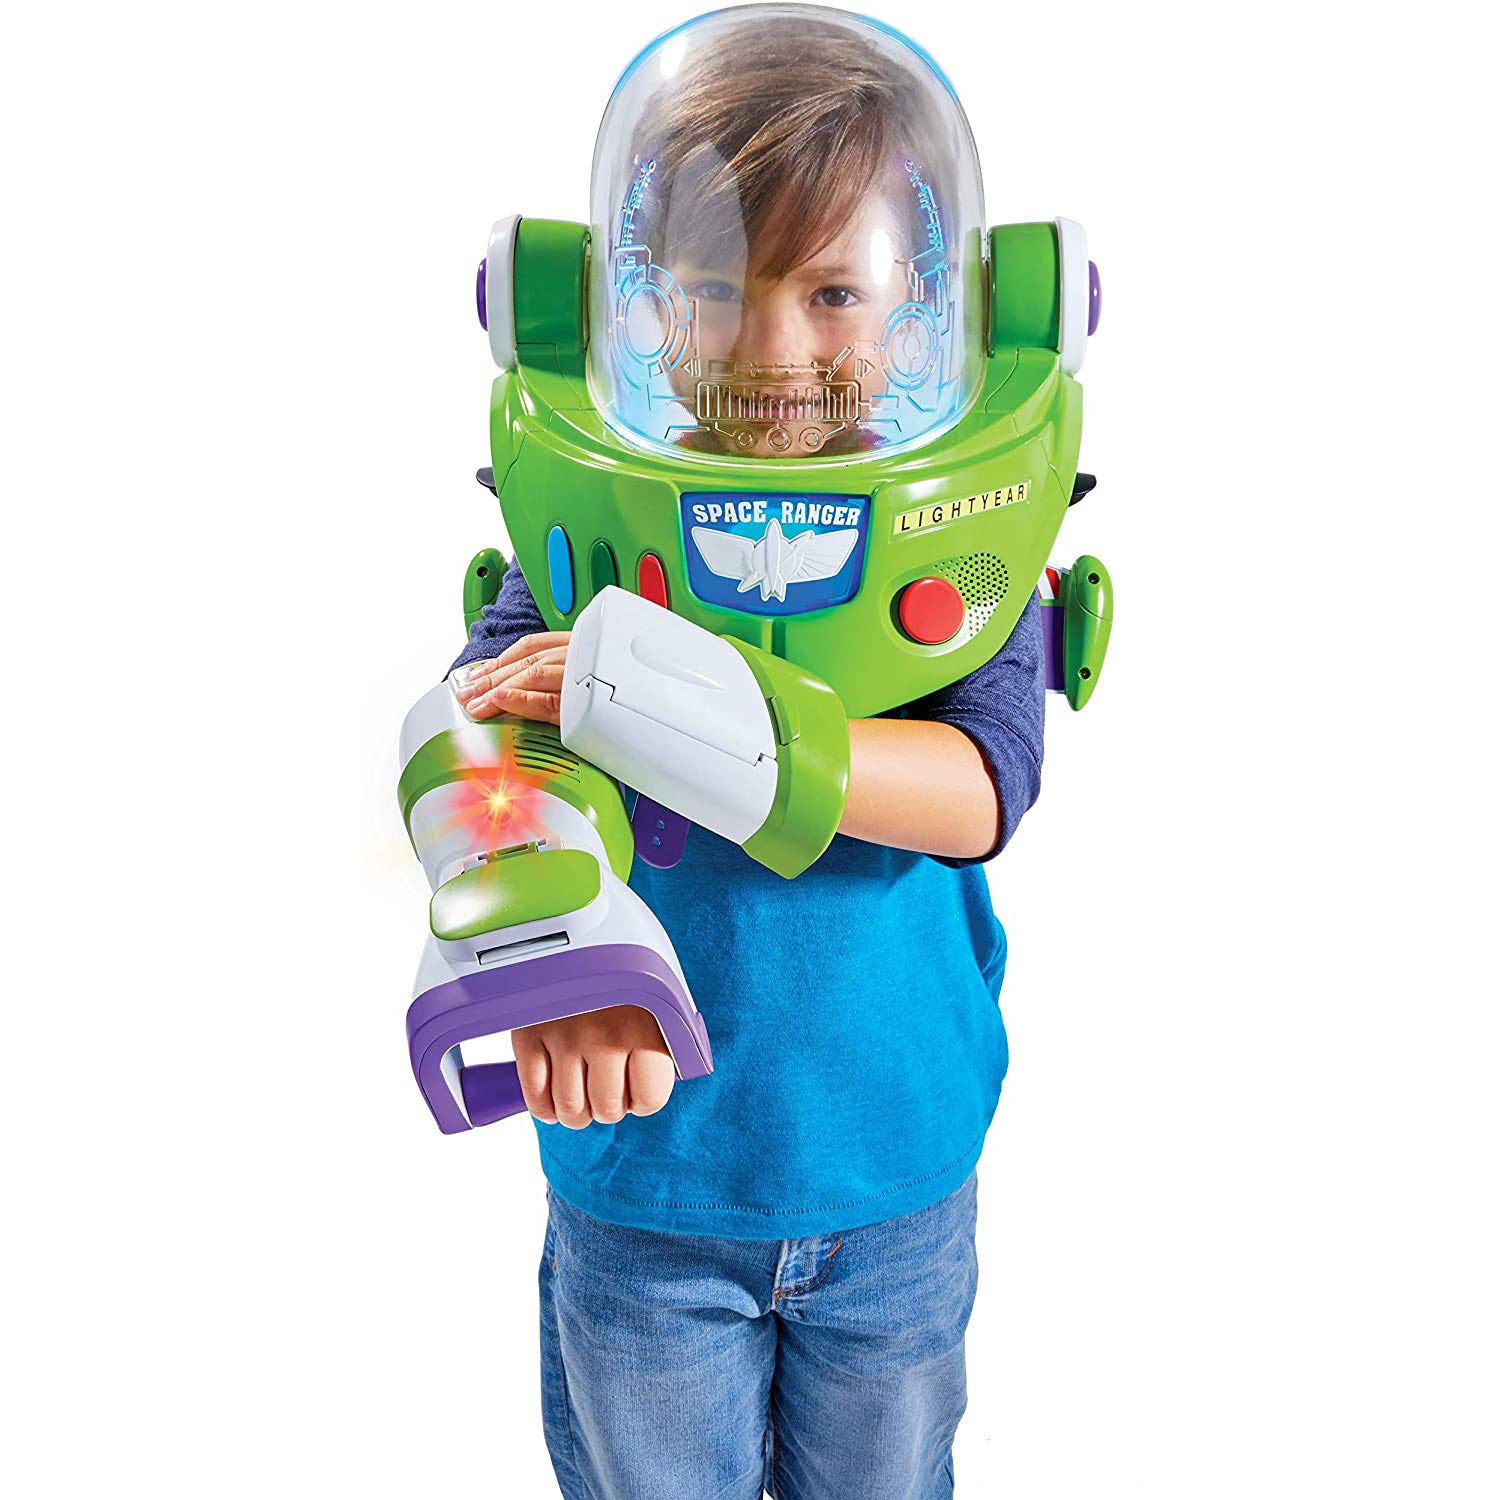 Disney Pixar Toy Story 4 Buzz Lightyear Toy Astronaut Helmet for Role-play Movie Action with Jetpack, Lights, Authentic Phrases and Sounds [Amazon Exclusive], Multi